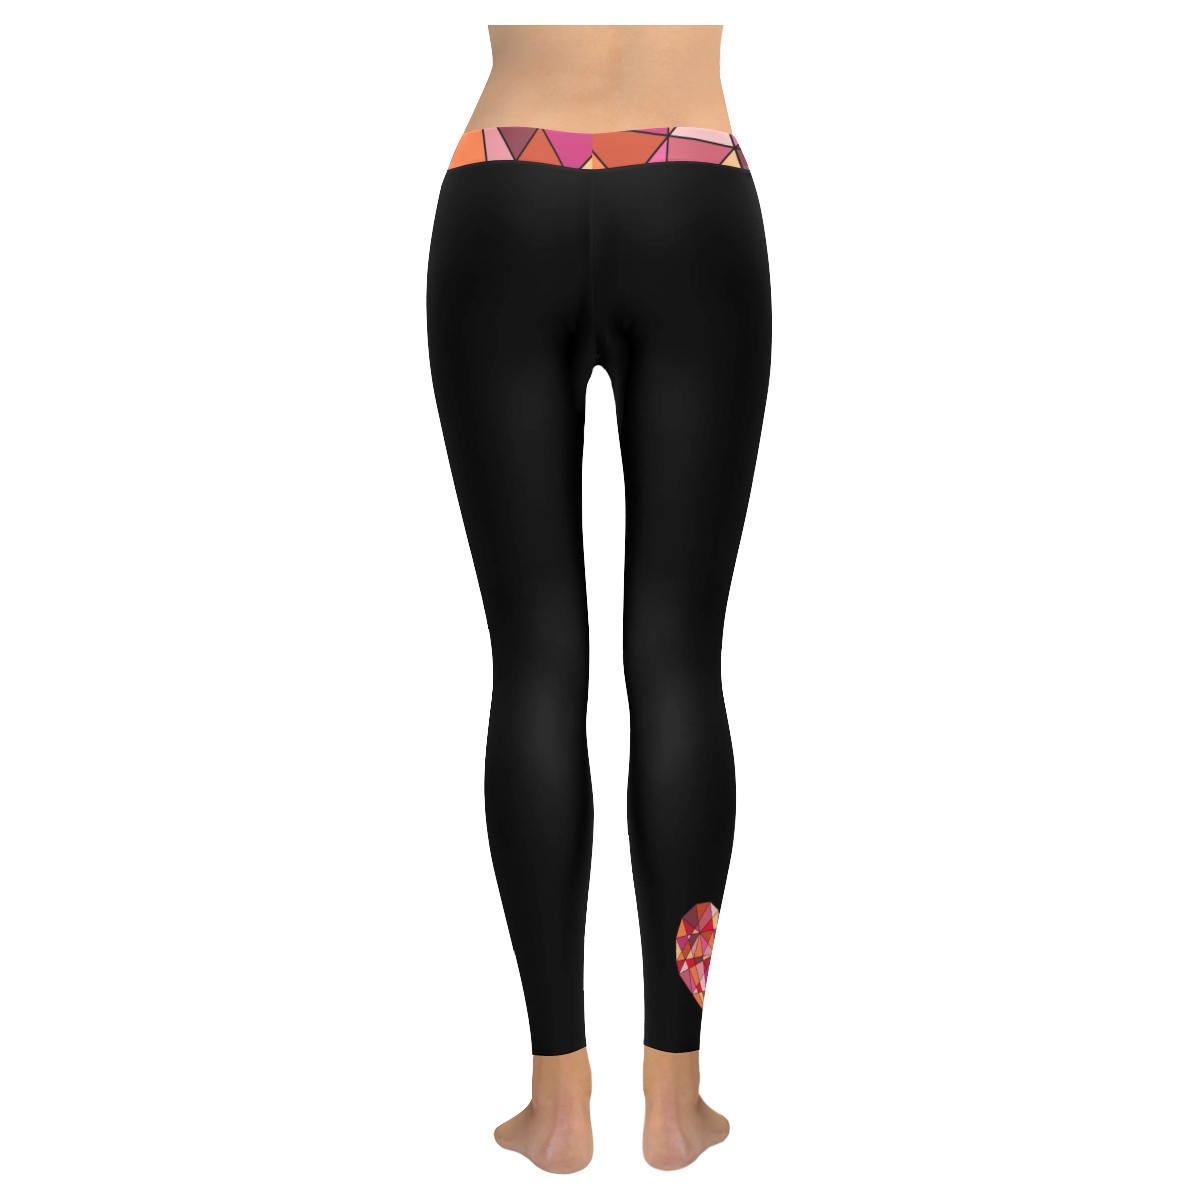 RED HEART WIREFRAME Women's Low Rise Leggings (Invisible Stitch) (Model L05)